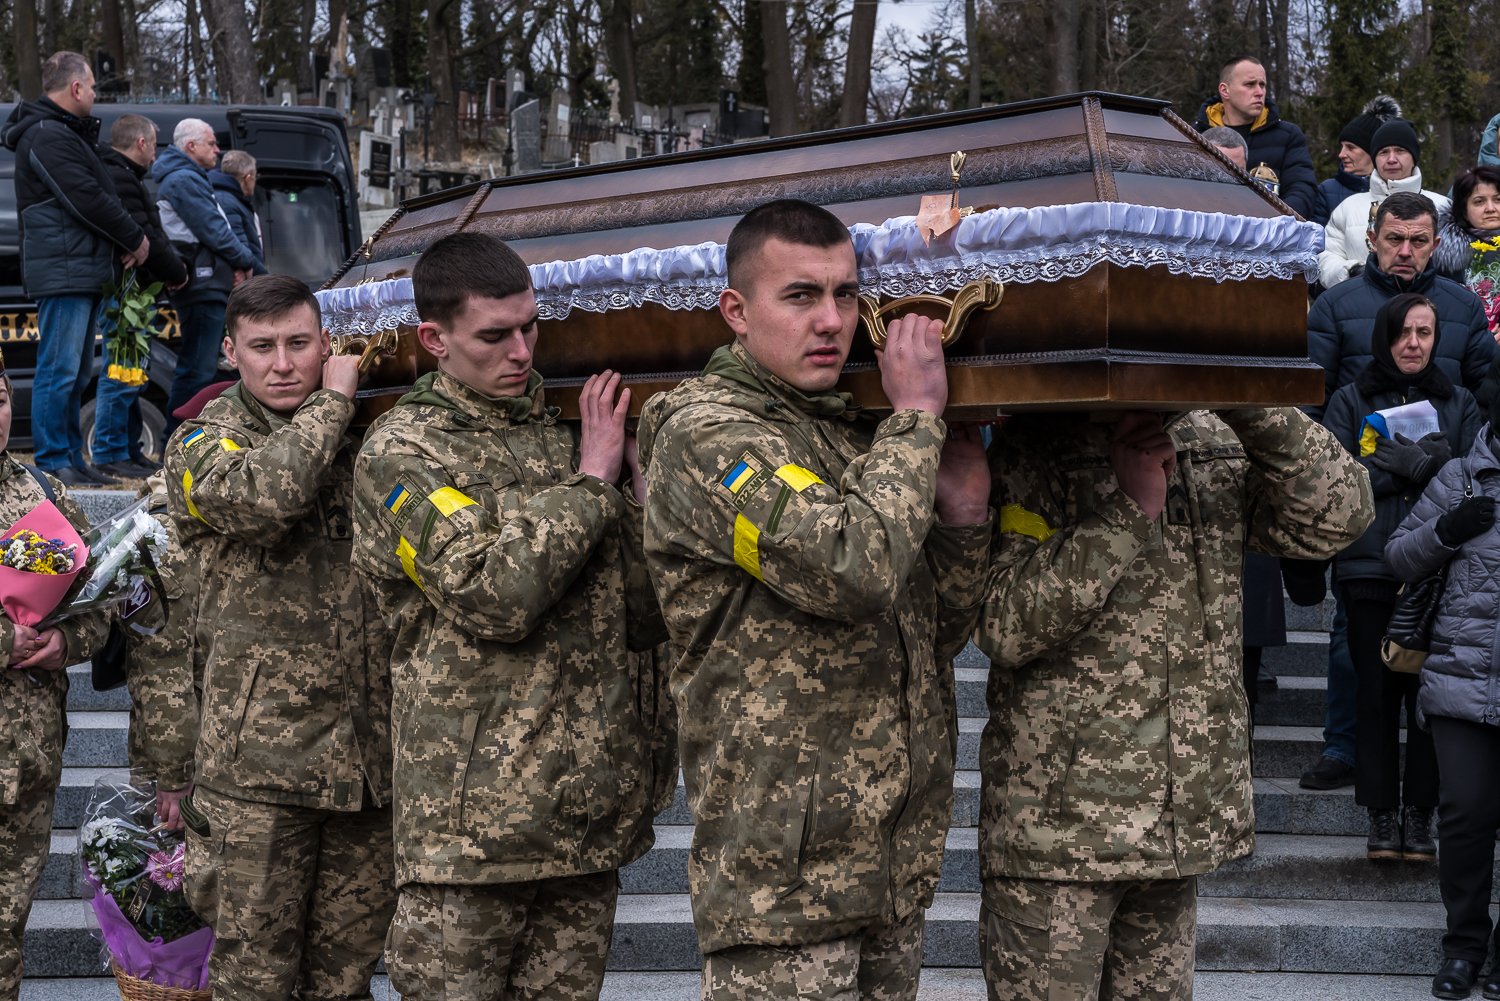  Ukrainian soldiers hold a casket containing the remains of fellow soldier Viktor Dudar, who was killed on March 2 in the war against Russia, at Lychakiv Cemetery on Tuesday, March 8, 2022 in Lviv, Ukraine. 